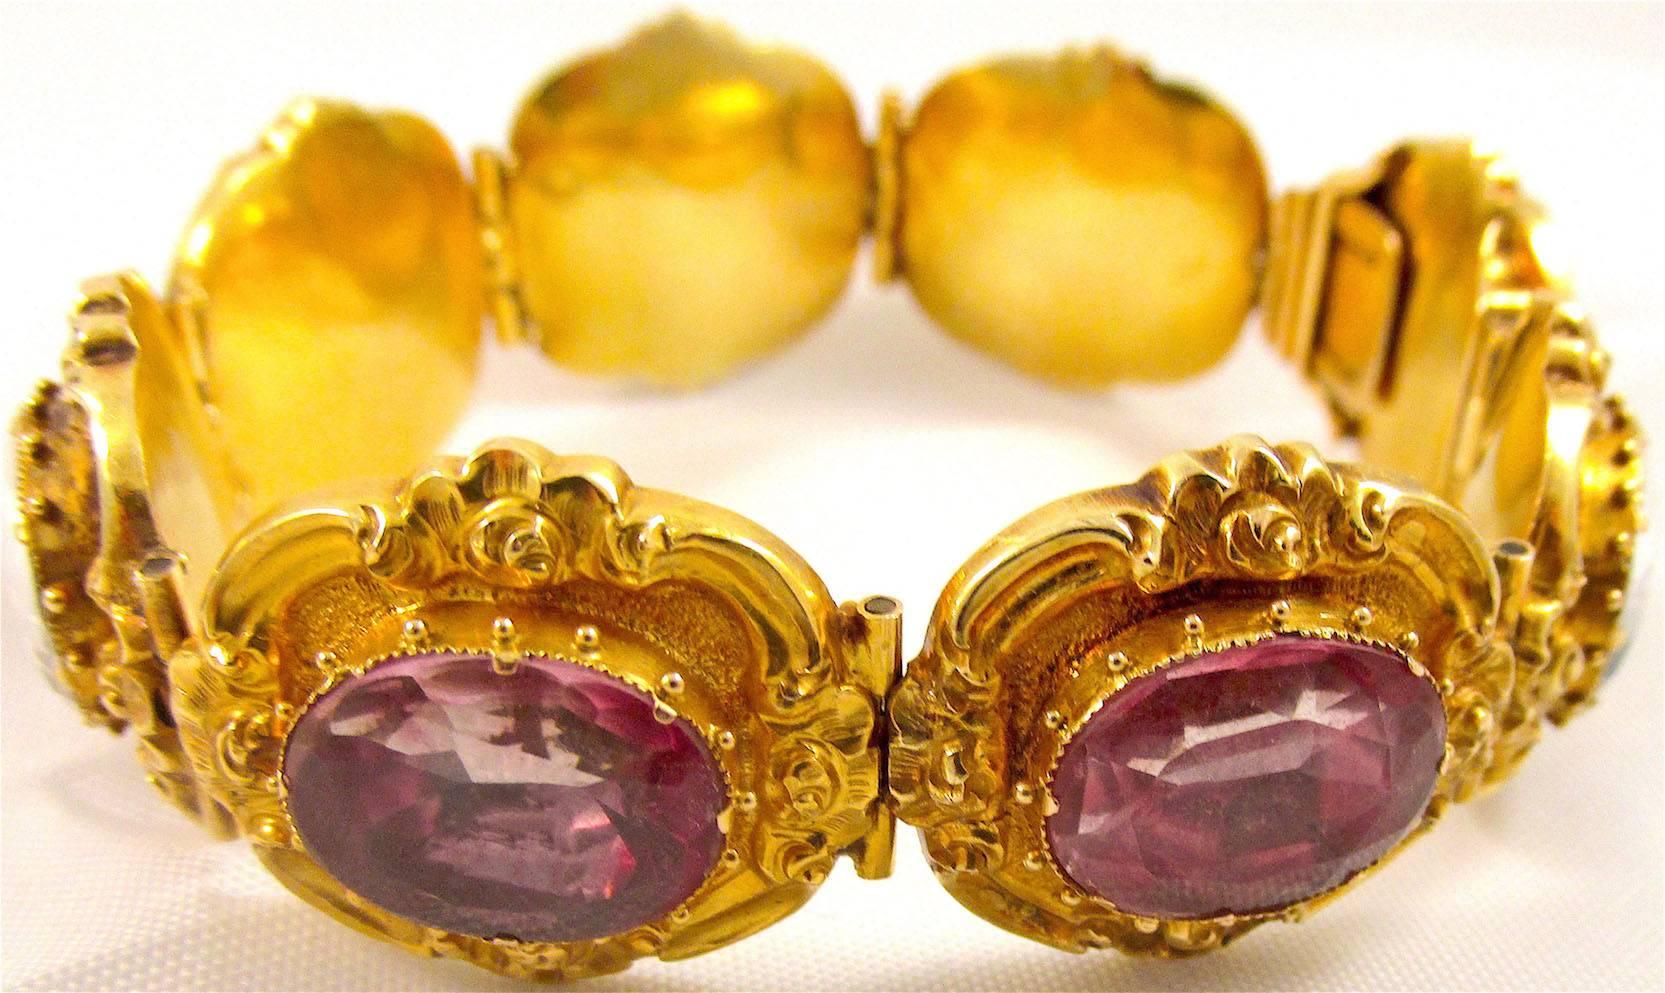 Exquisite Georgian 18K gold and multi-colored harlequin crystal bracelet. The bright colors of the crystals are enhanced by the elaberate gold work that surrounds them. The bracelet measures 7